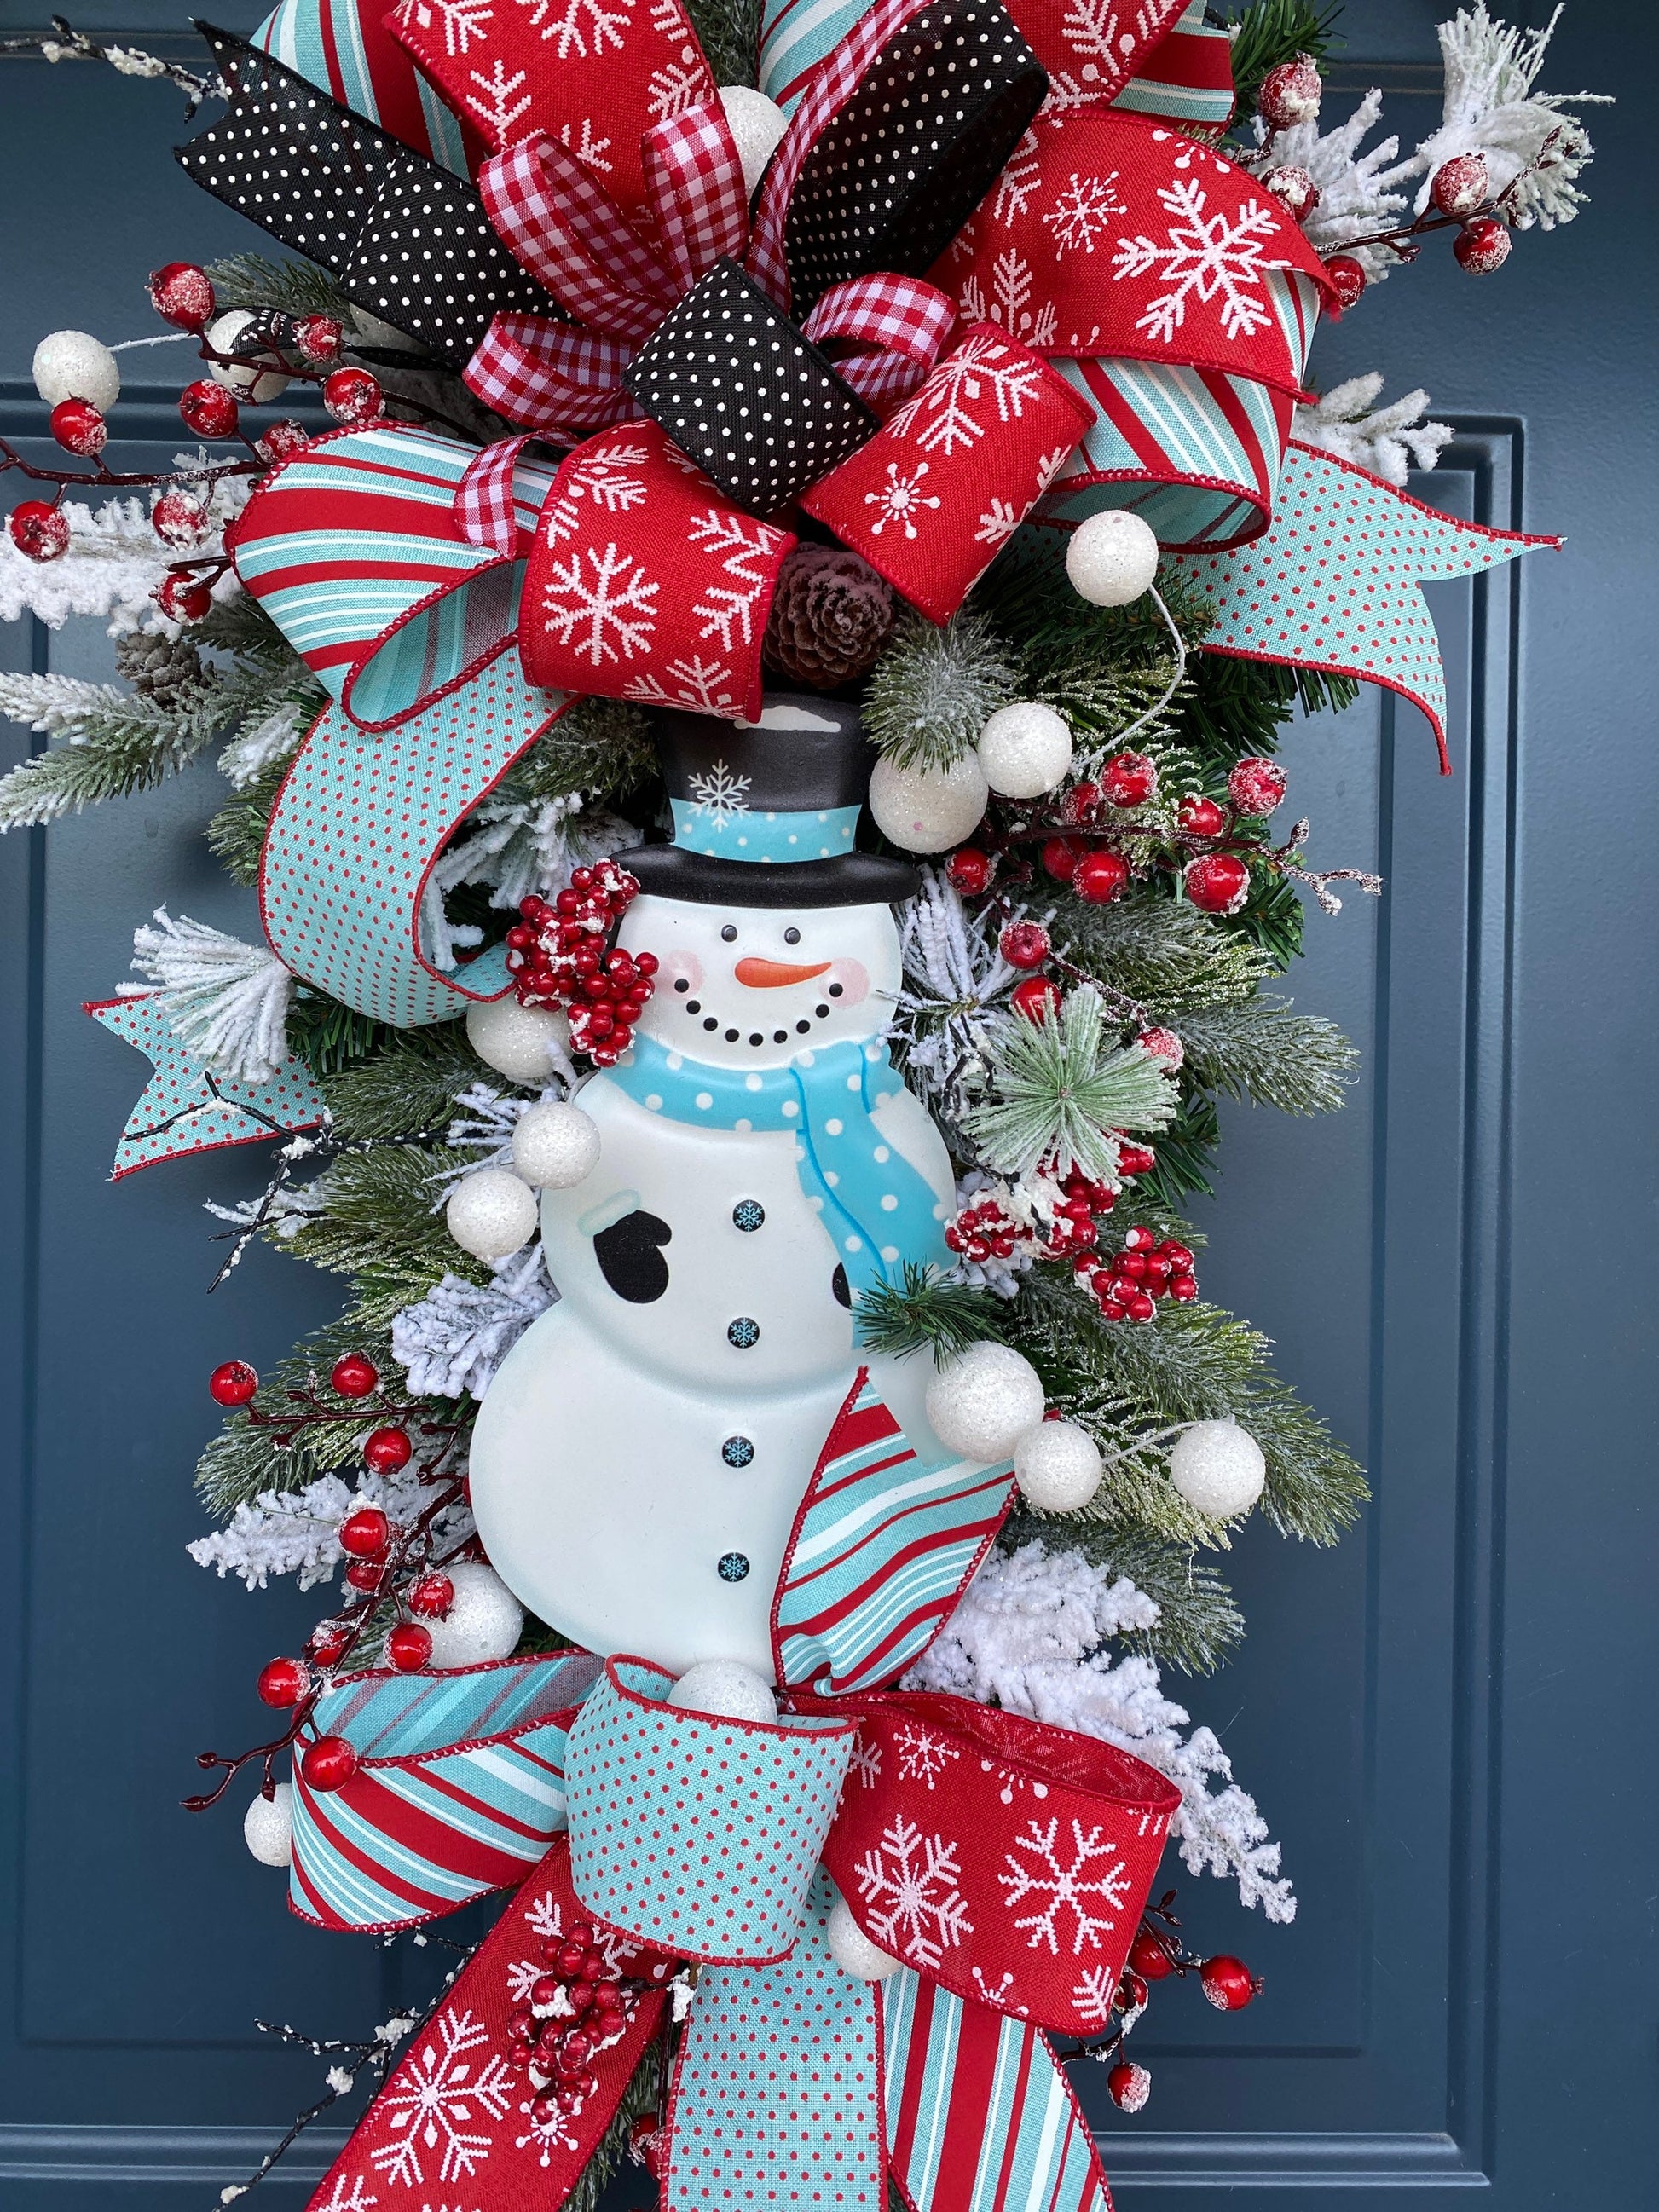 Winter Snowman Teardrop Swag Wreath for Front Door, Snowy Decor for Christmas and Winter, Frosty Decoration for front door